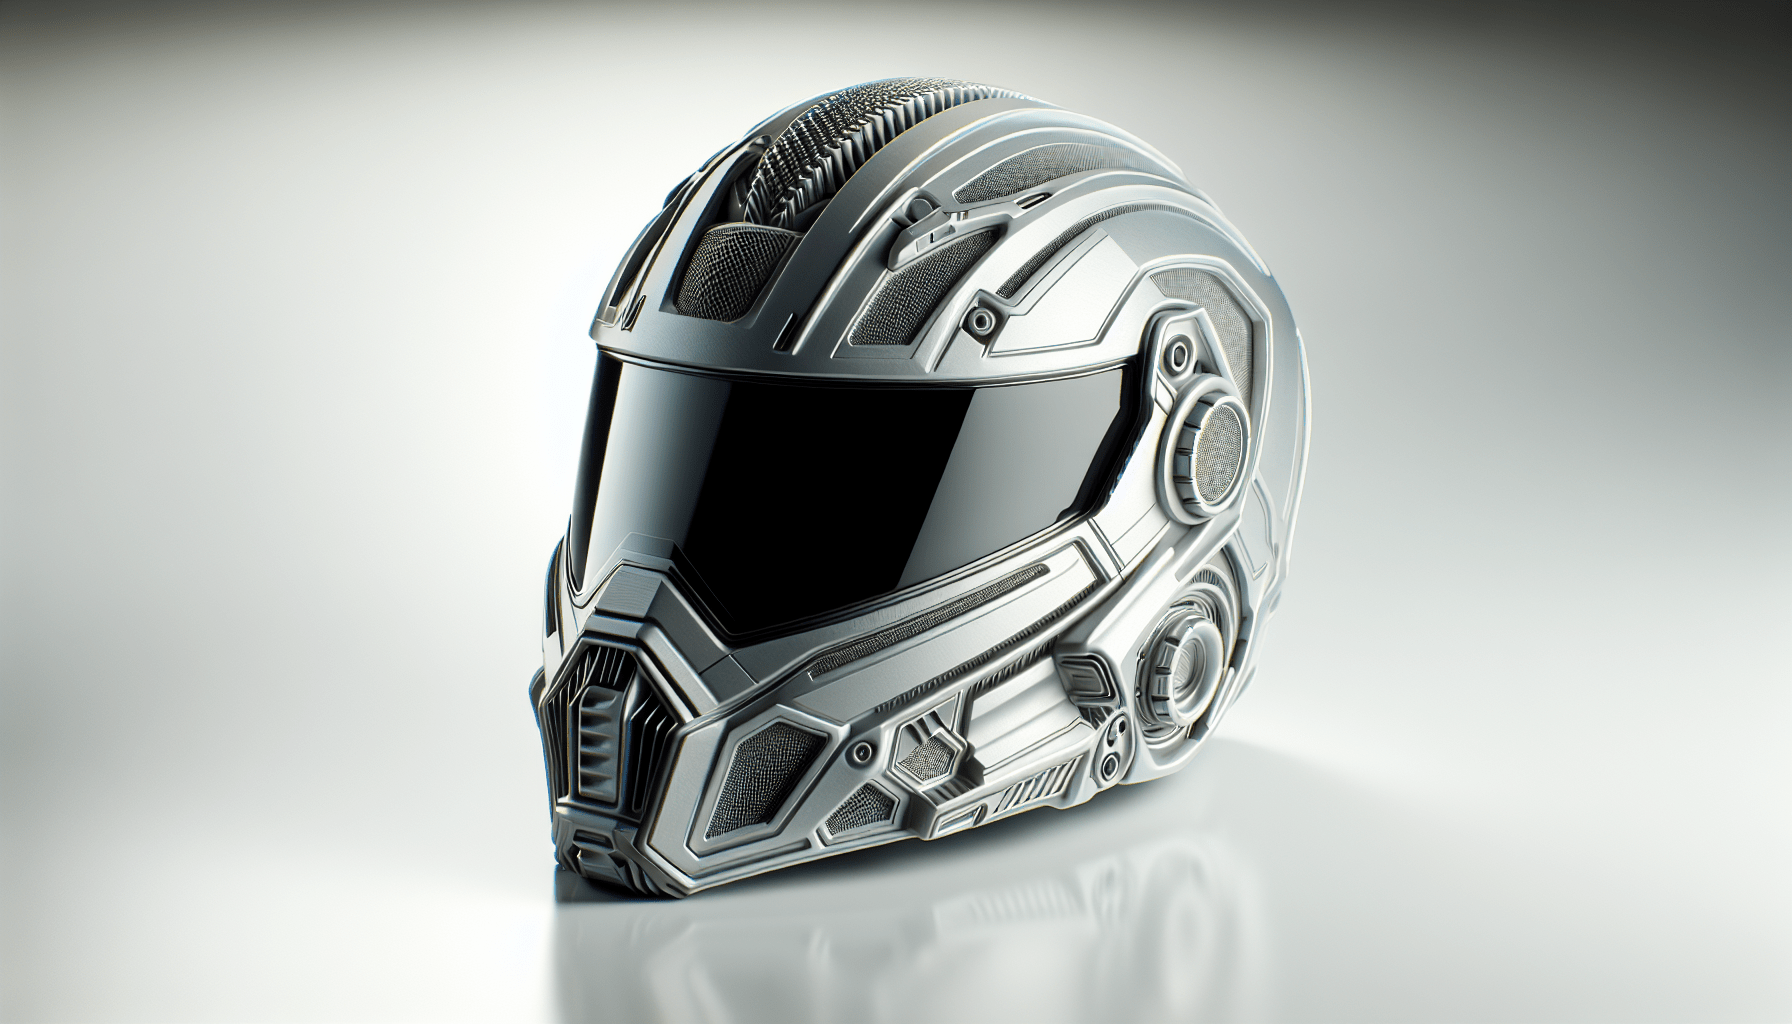 How to Scale 3d Printed Helmets! Perfect Sized Helmets Everytime! #3dprinted #3dprint #3dprinting